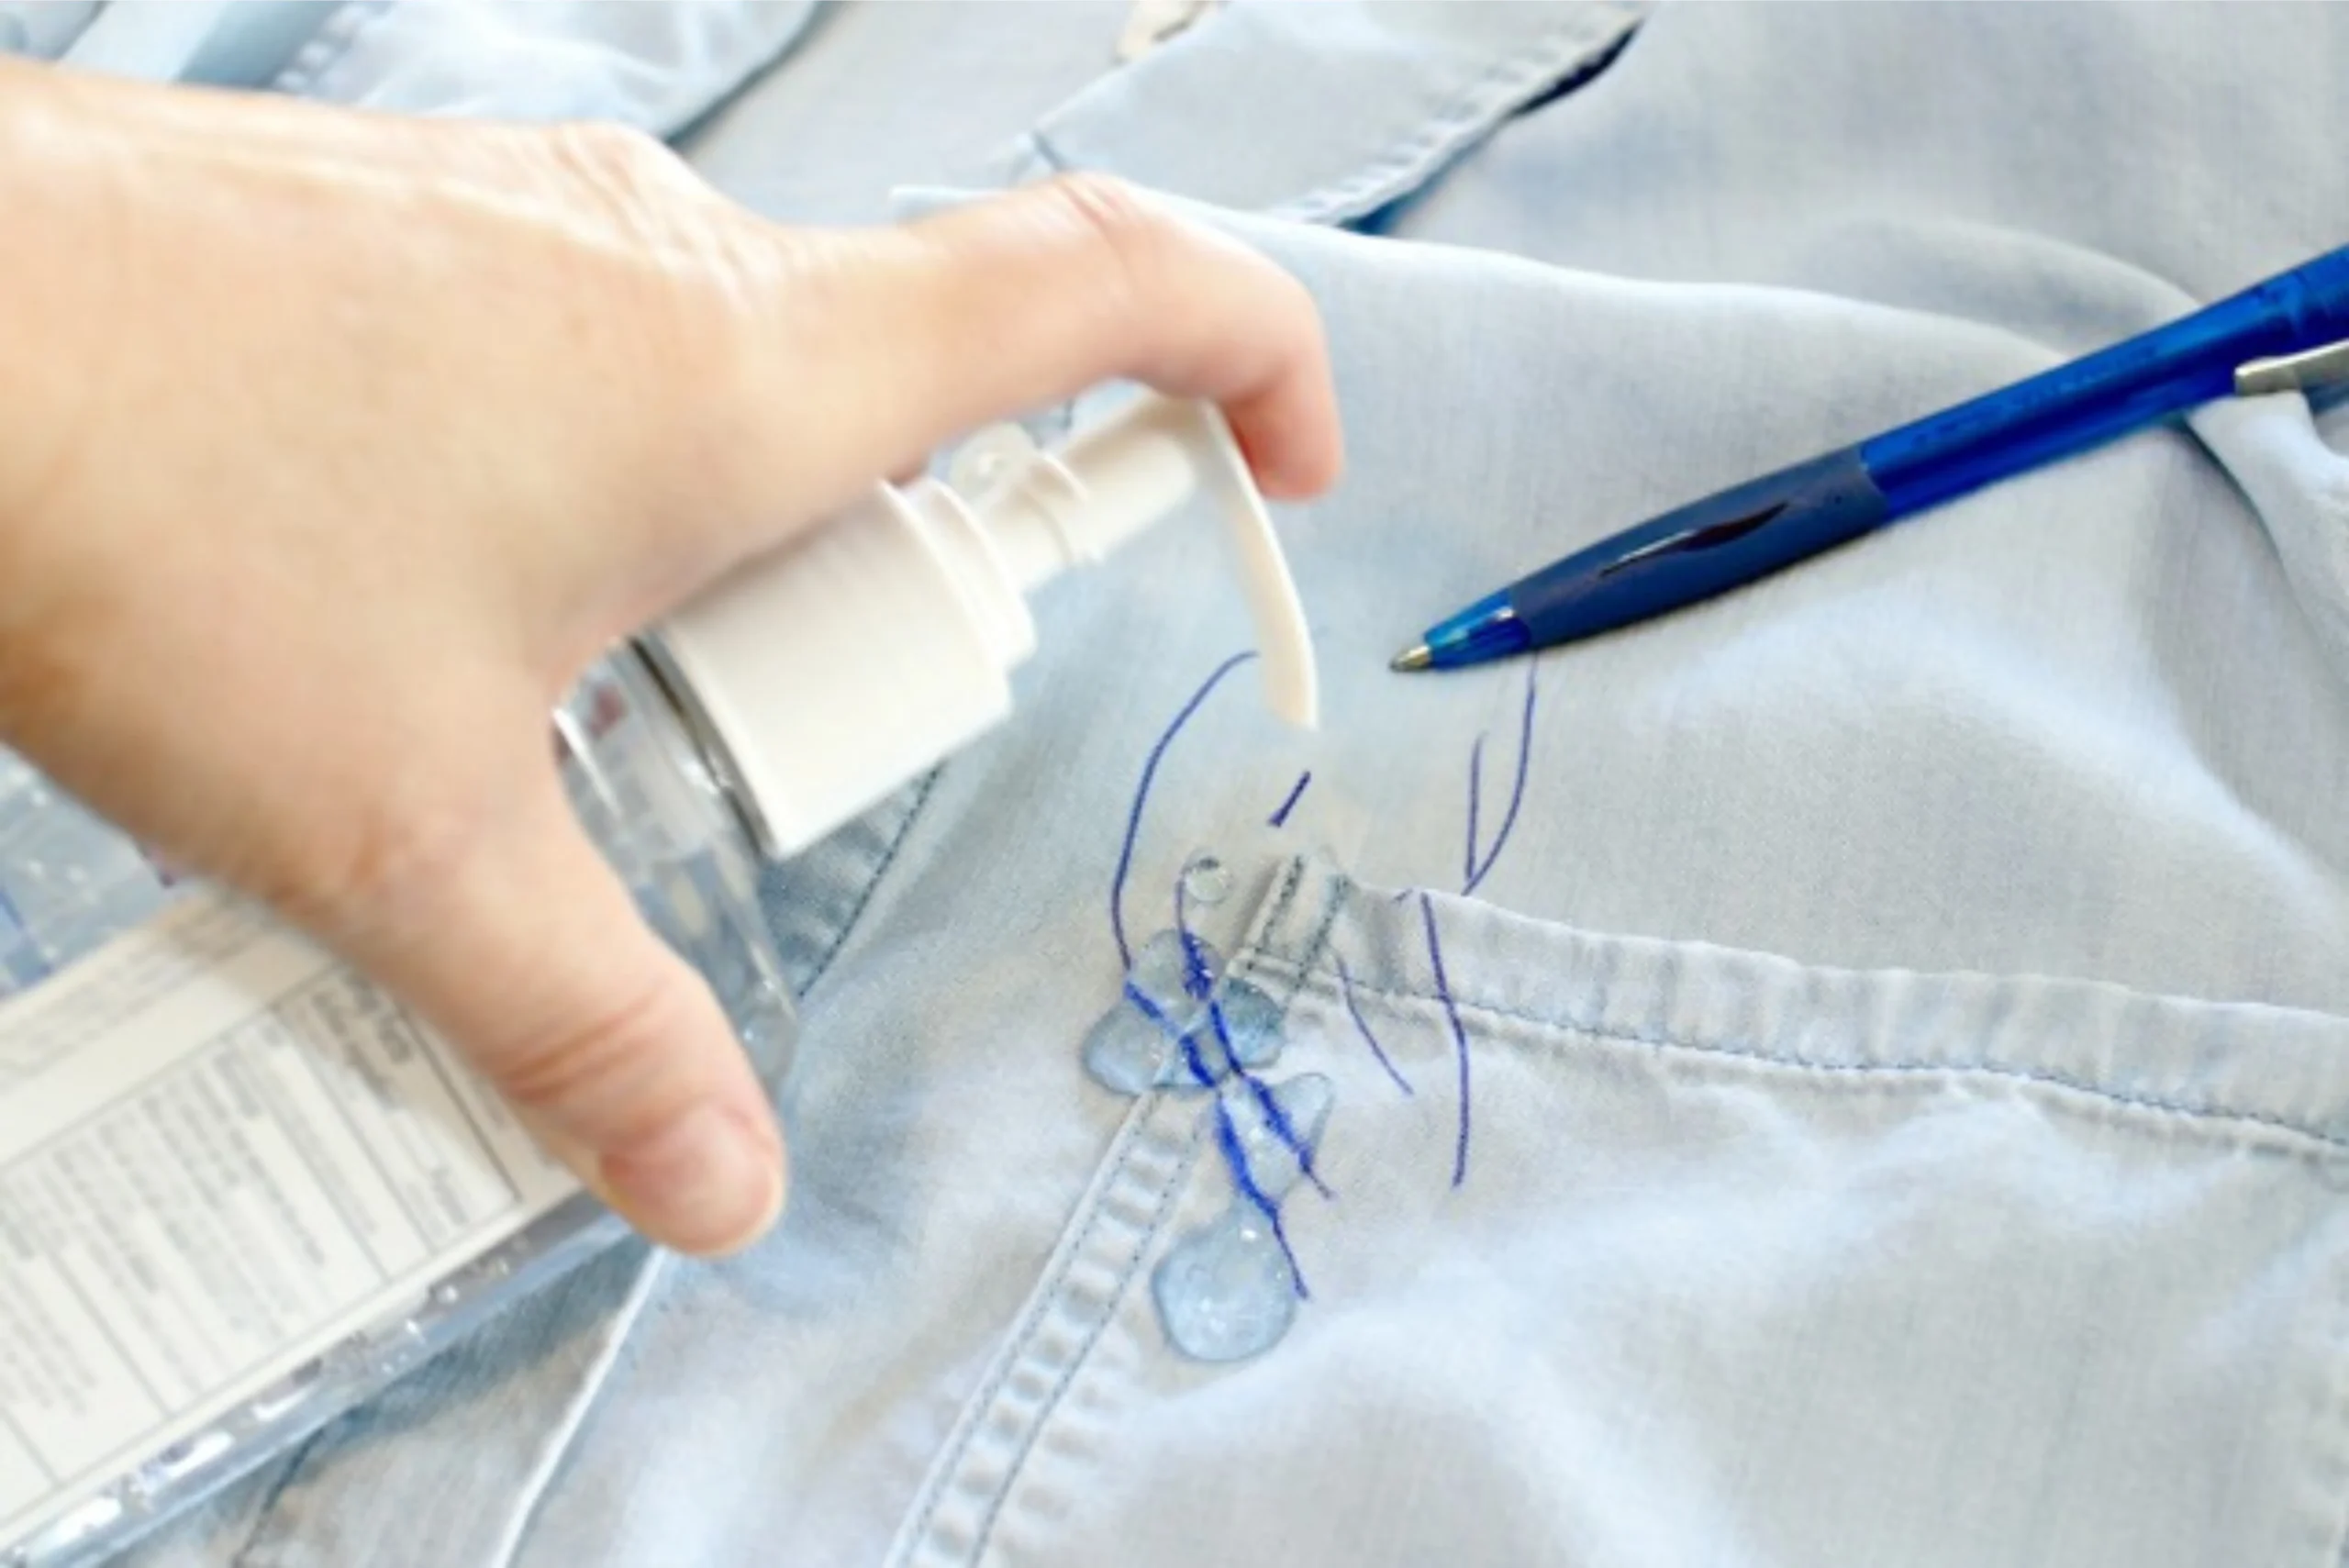 How To Get Ink Pen Out Of Clothes Effective Methods and Tips